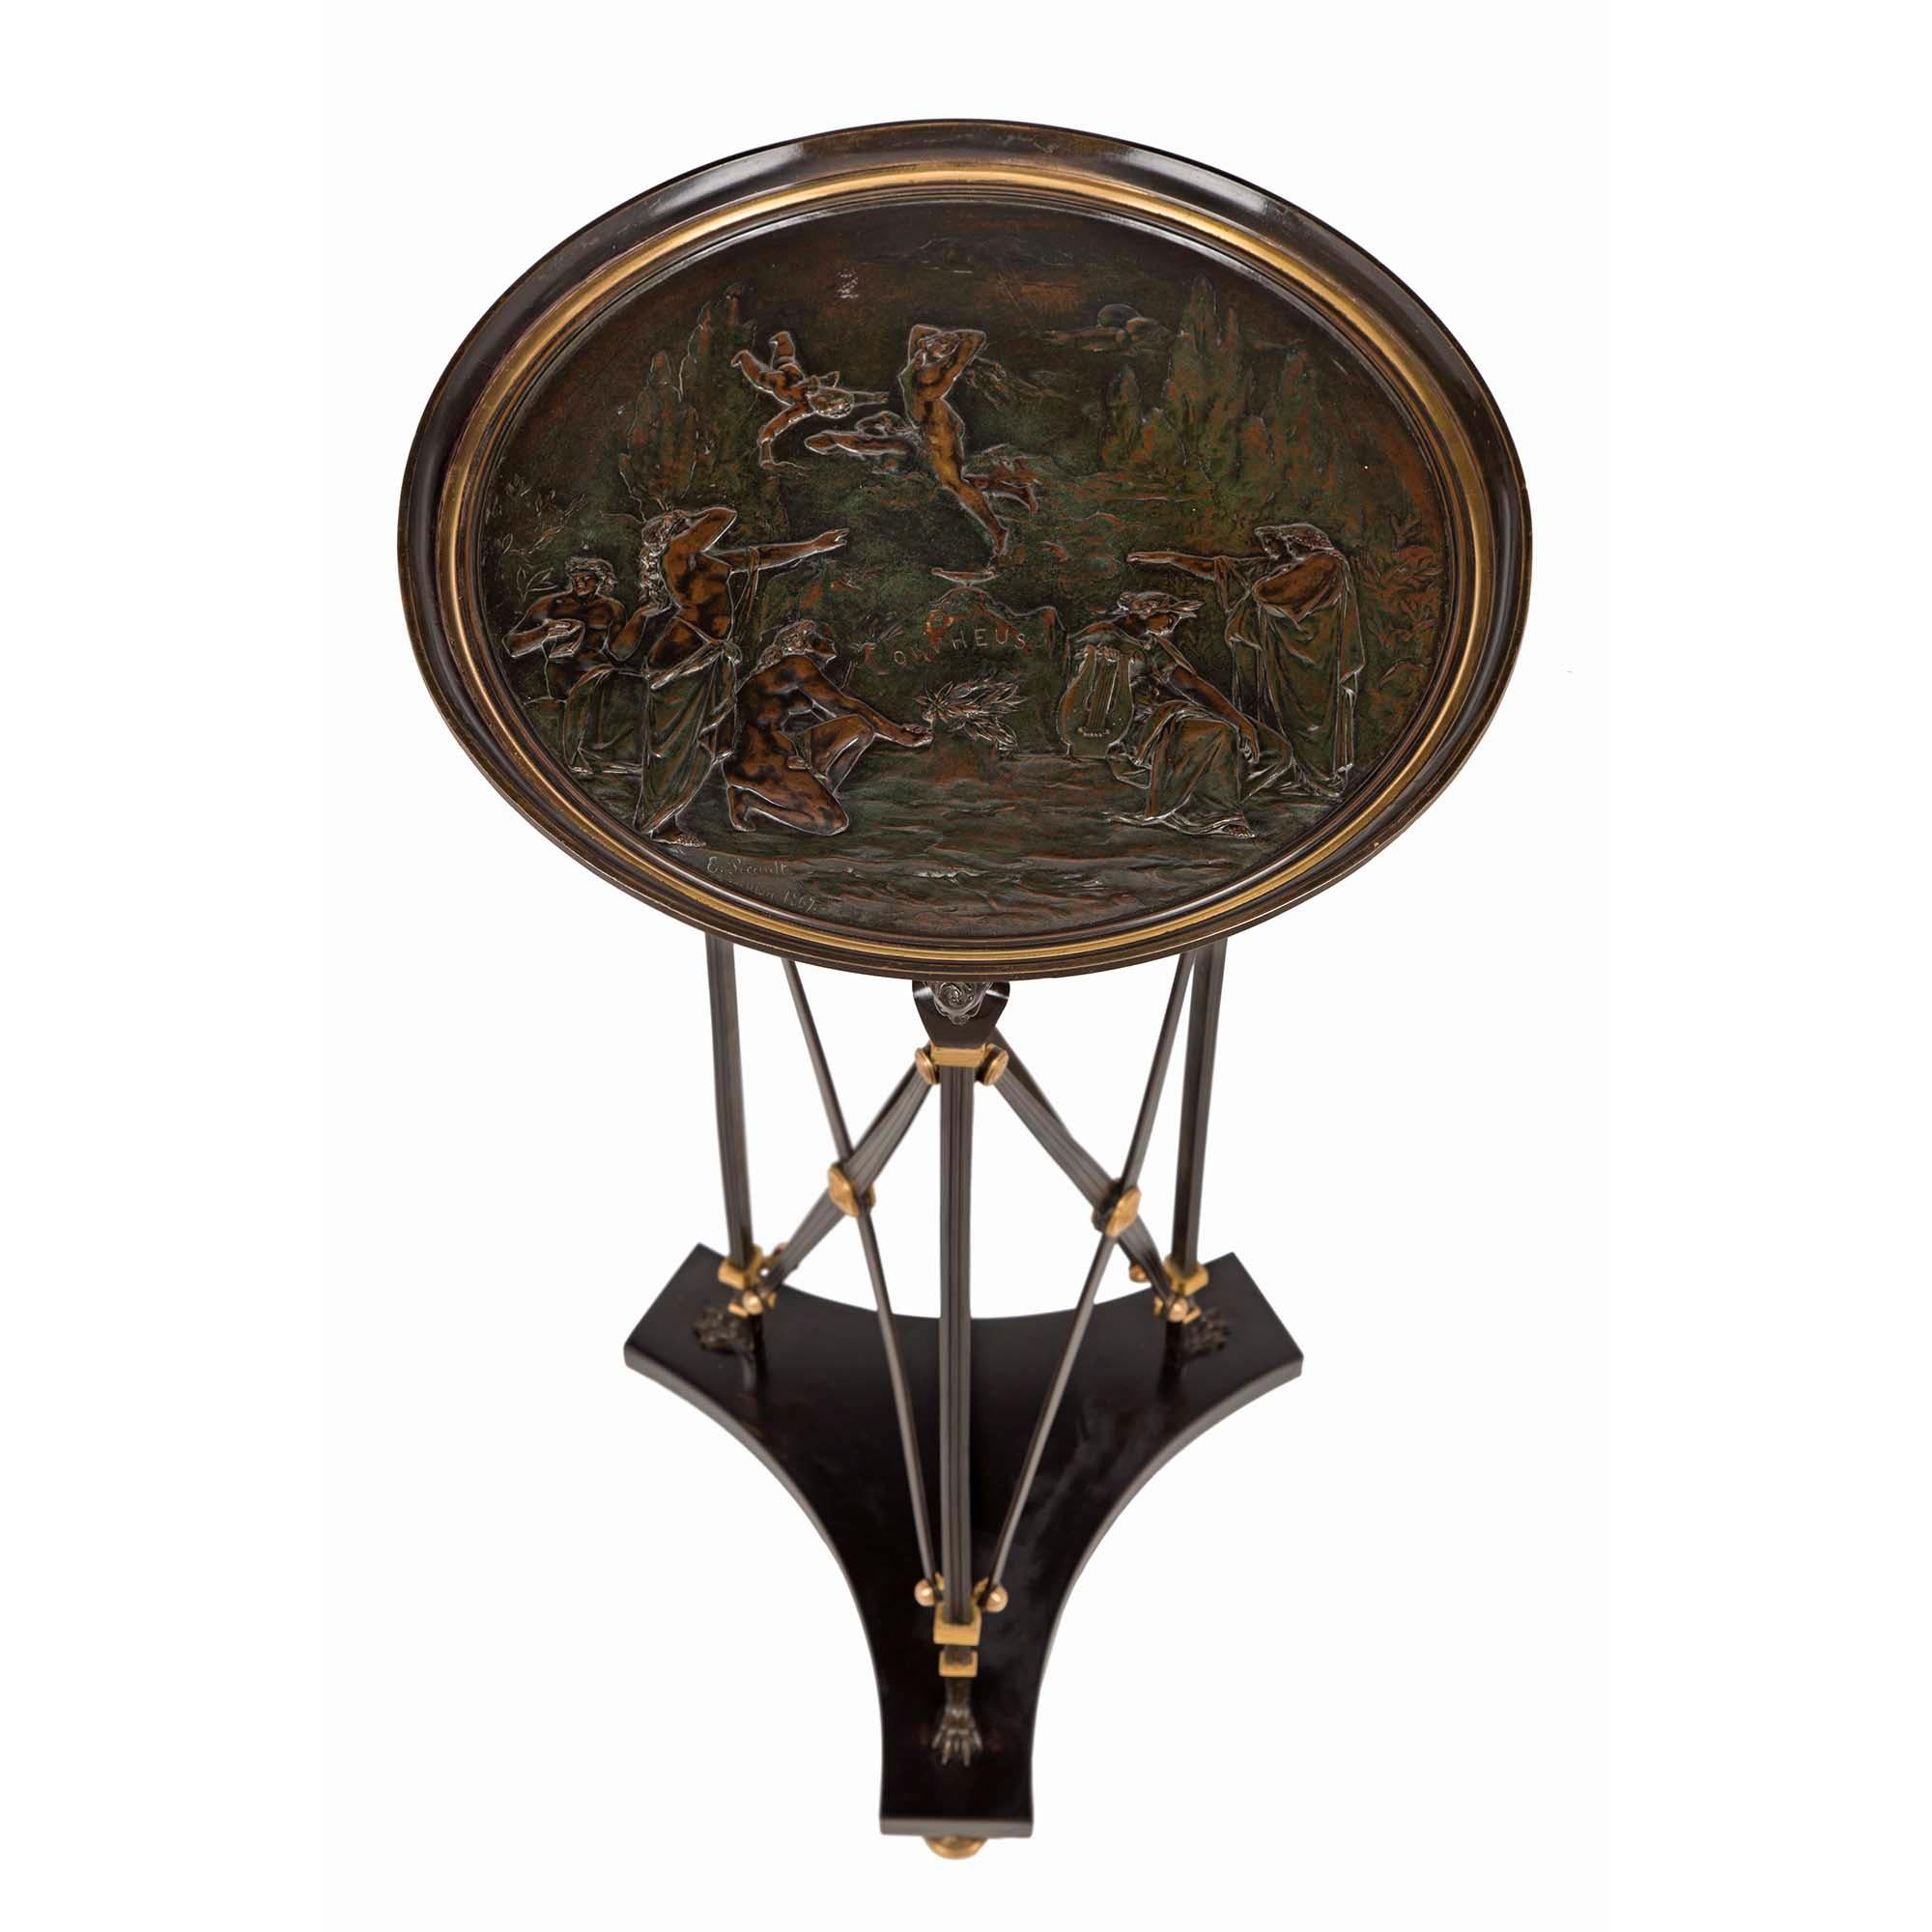 A very handsome French 19th century Renaissance St. patinated bronze tazza-designed side table, signed E. Picault, Salon 1867. Raised on ormolu topie shaped feet below a triangular concave-sided black Belgian marble base. Patinated bronze supports